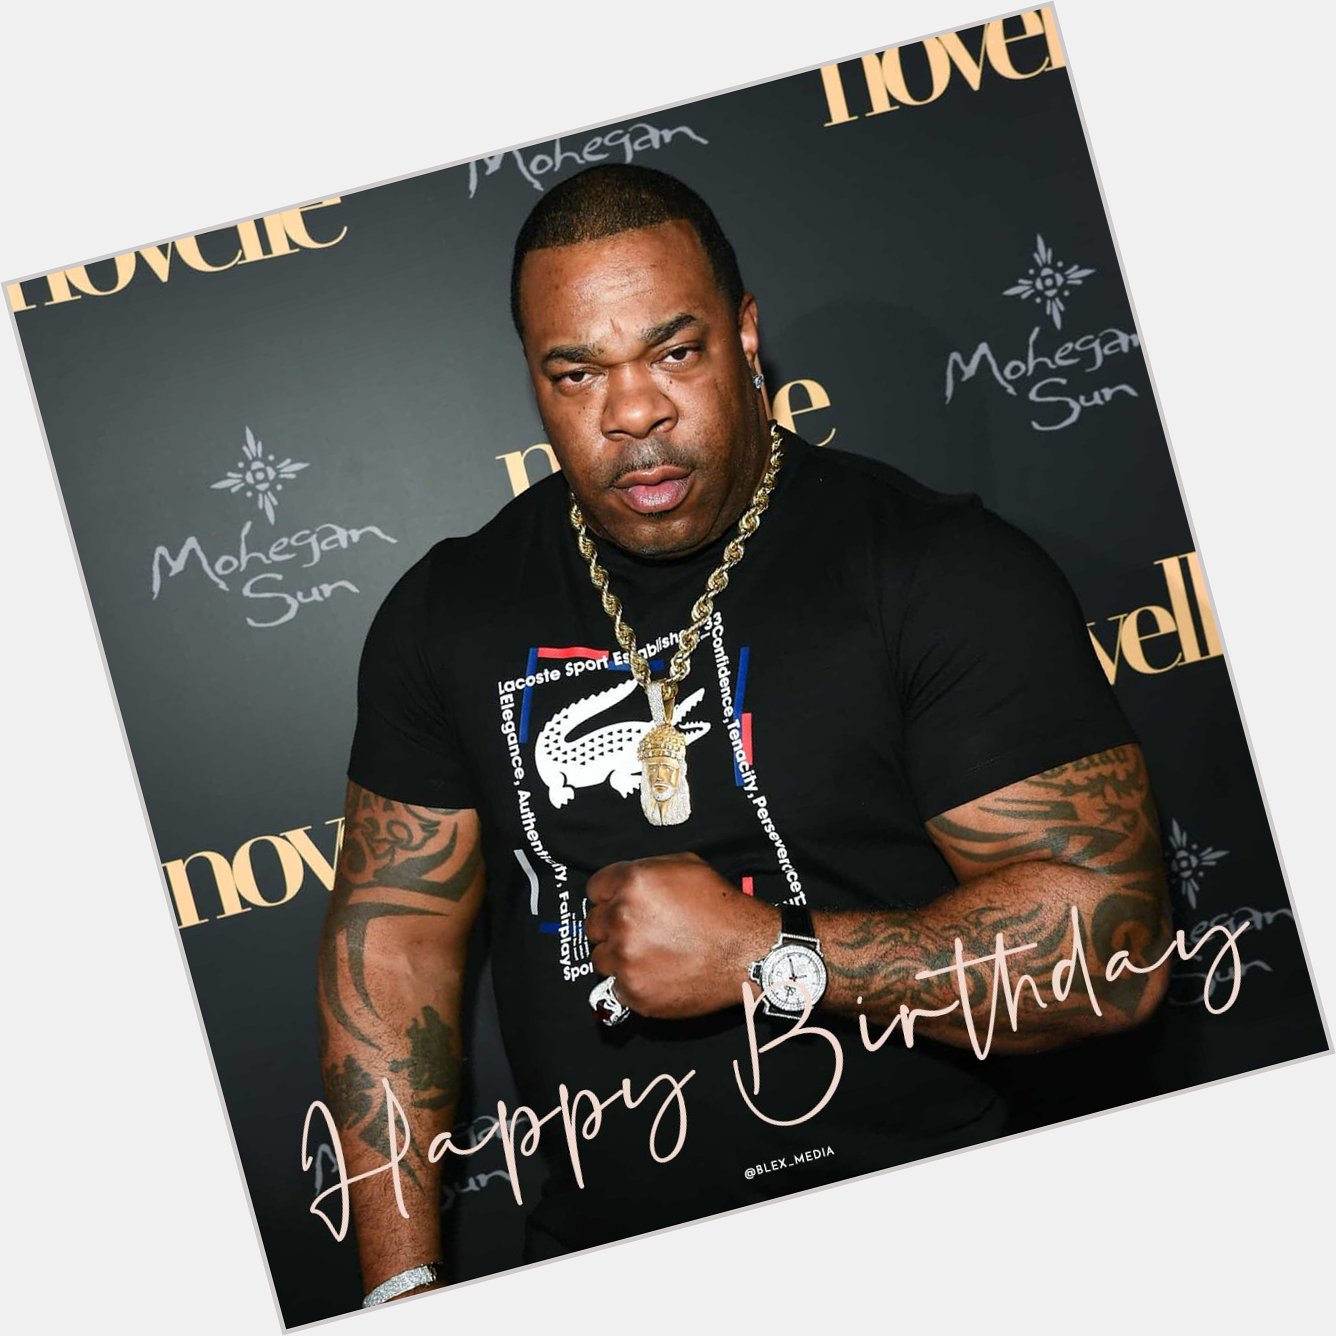 Happy Birthday, Busta Rhymes! What\s your favorite role of his?? Mine is in Shaft! 